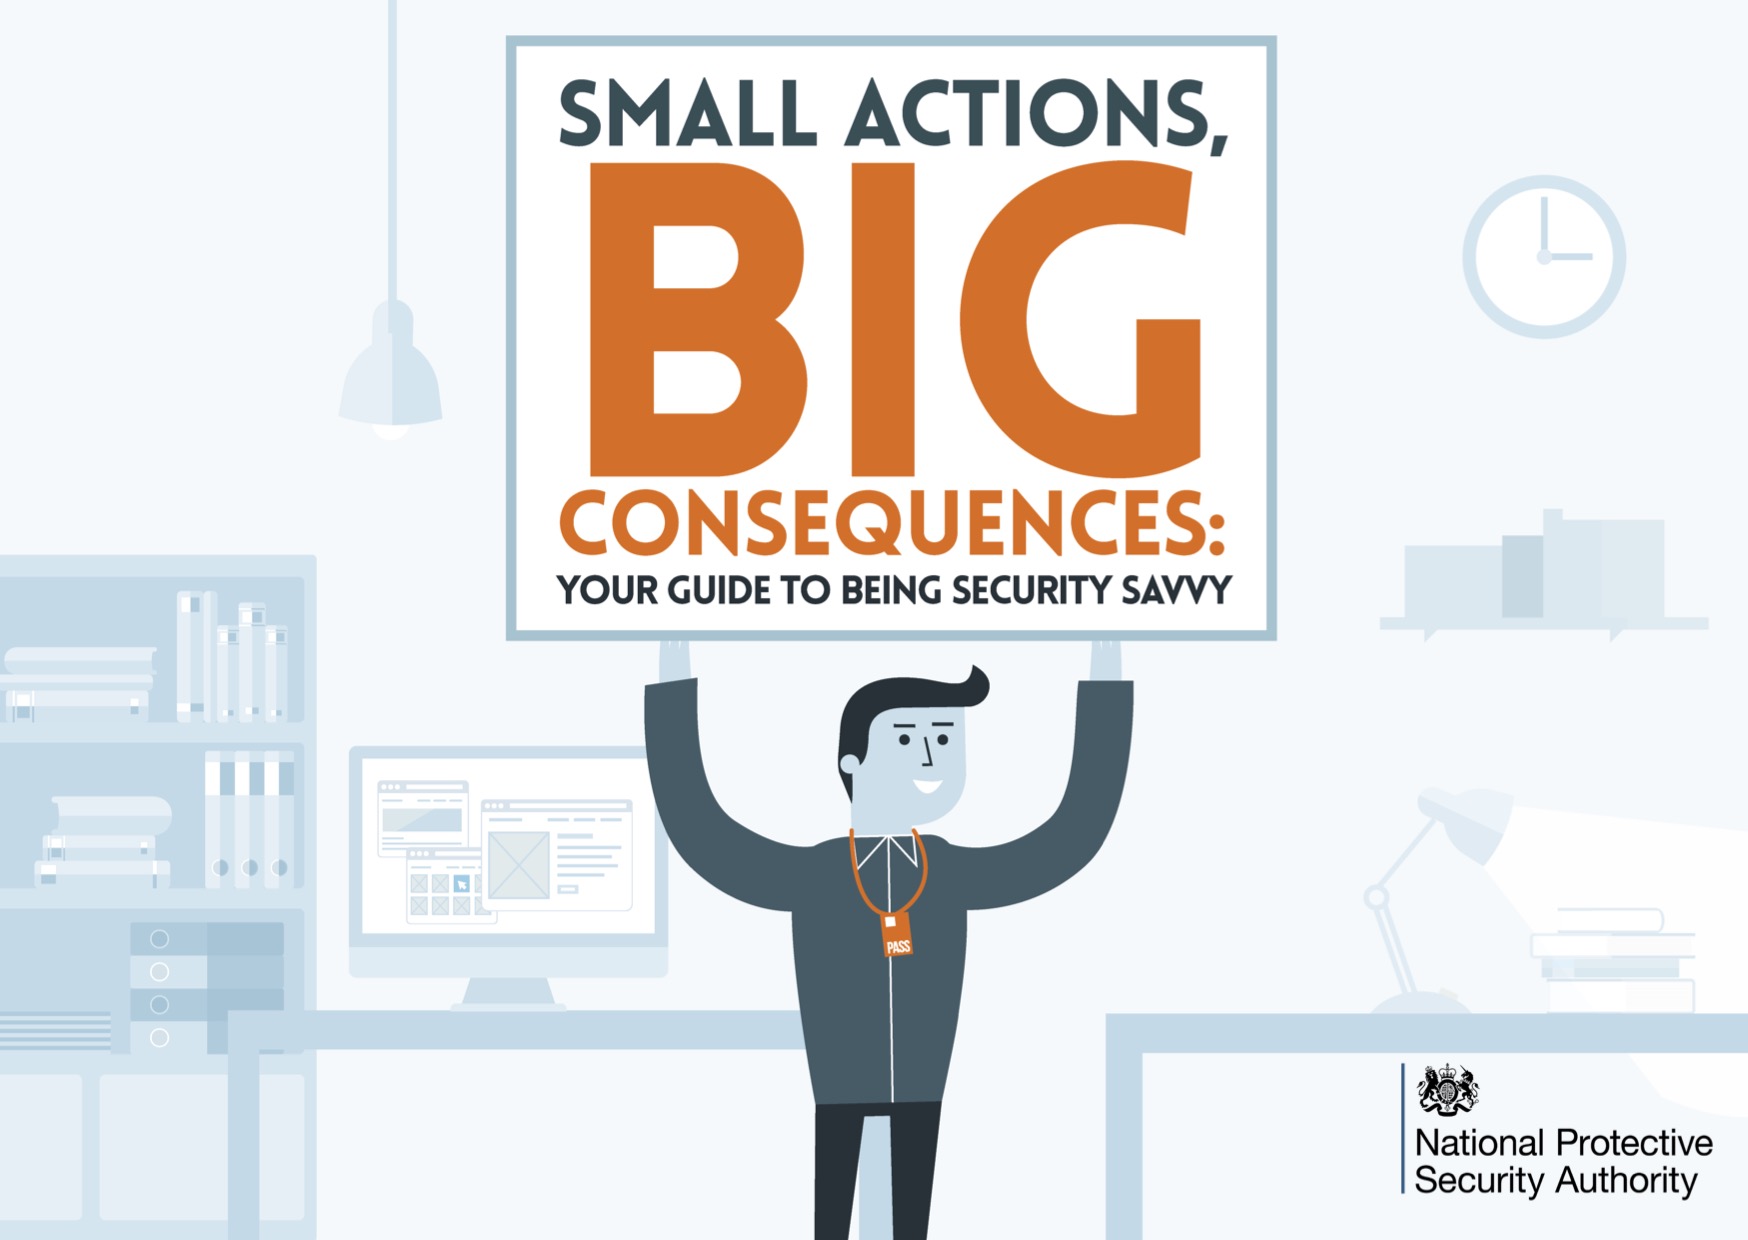 Small Actions Big Consequences image